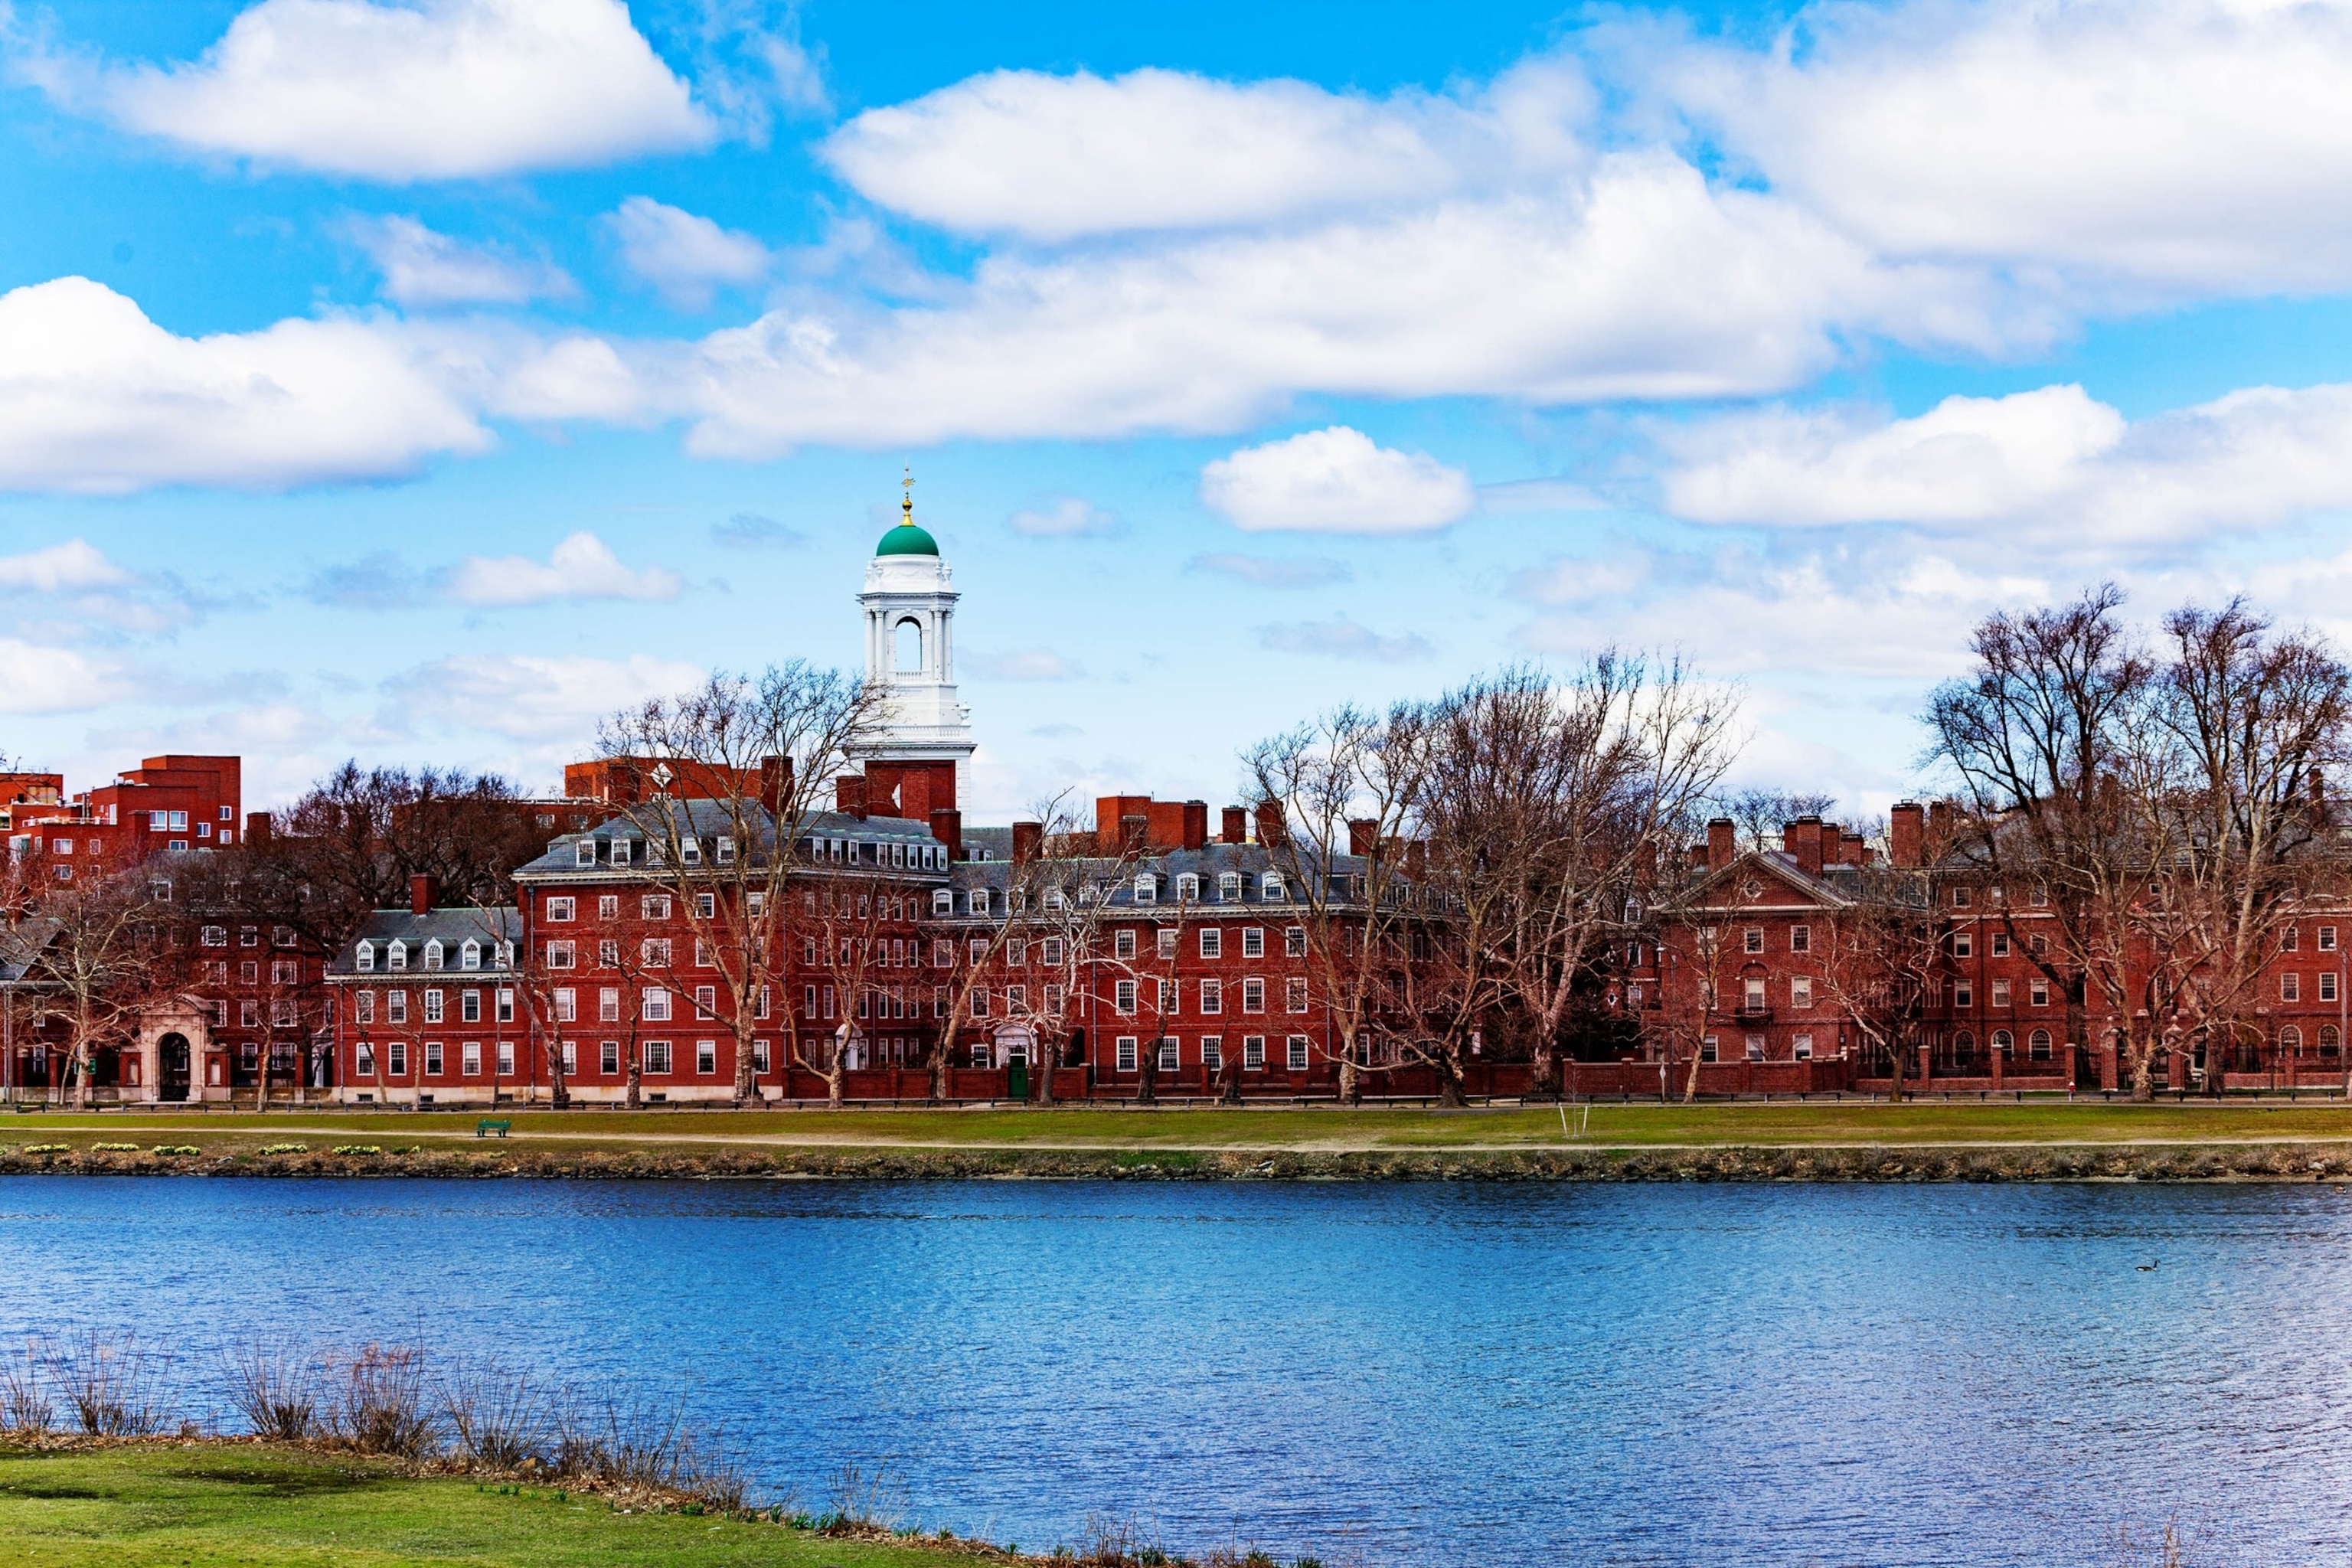 PHOTO: Dunster House in Cambridge at Harvard University is pictured in 2022 image. 